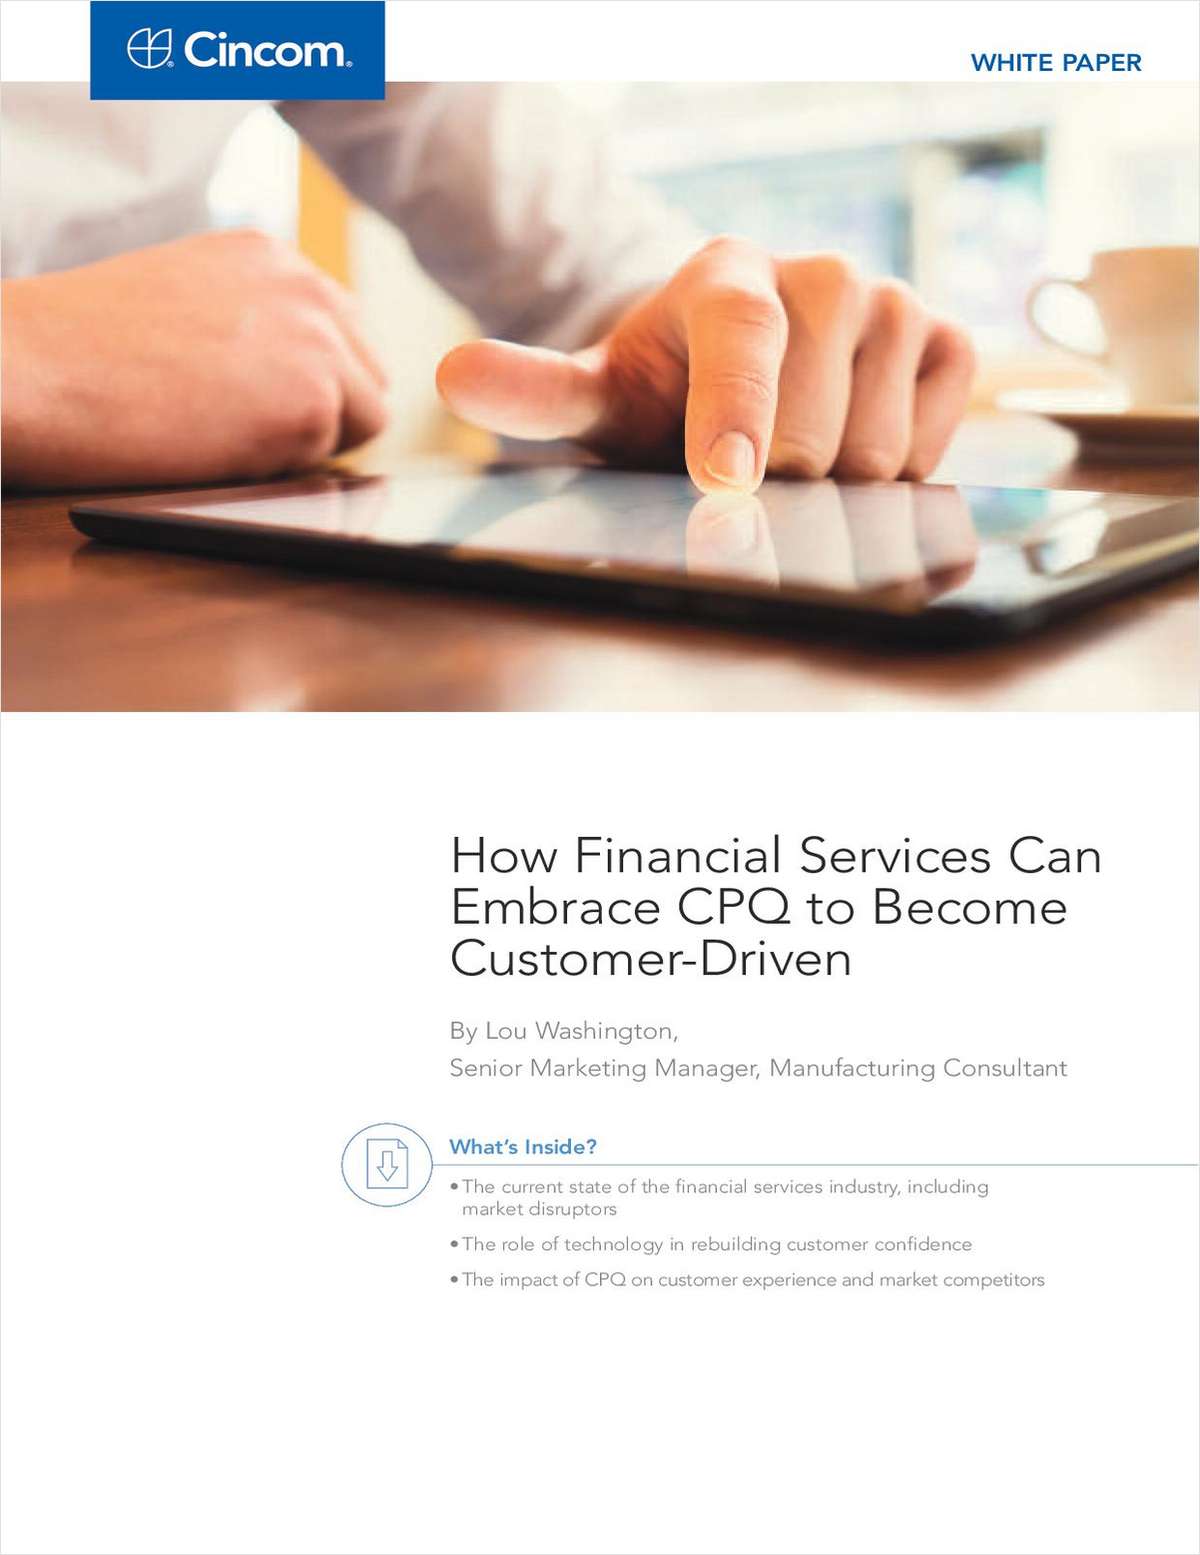 Financial Services: What's the Key to Being Customer-Driven?